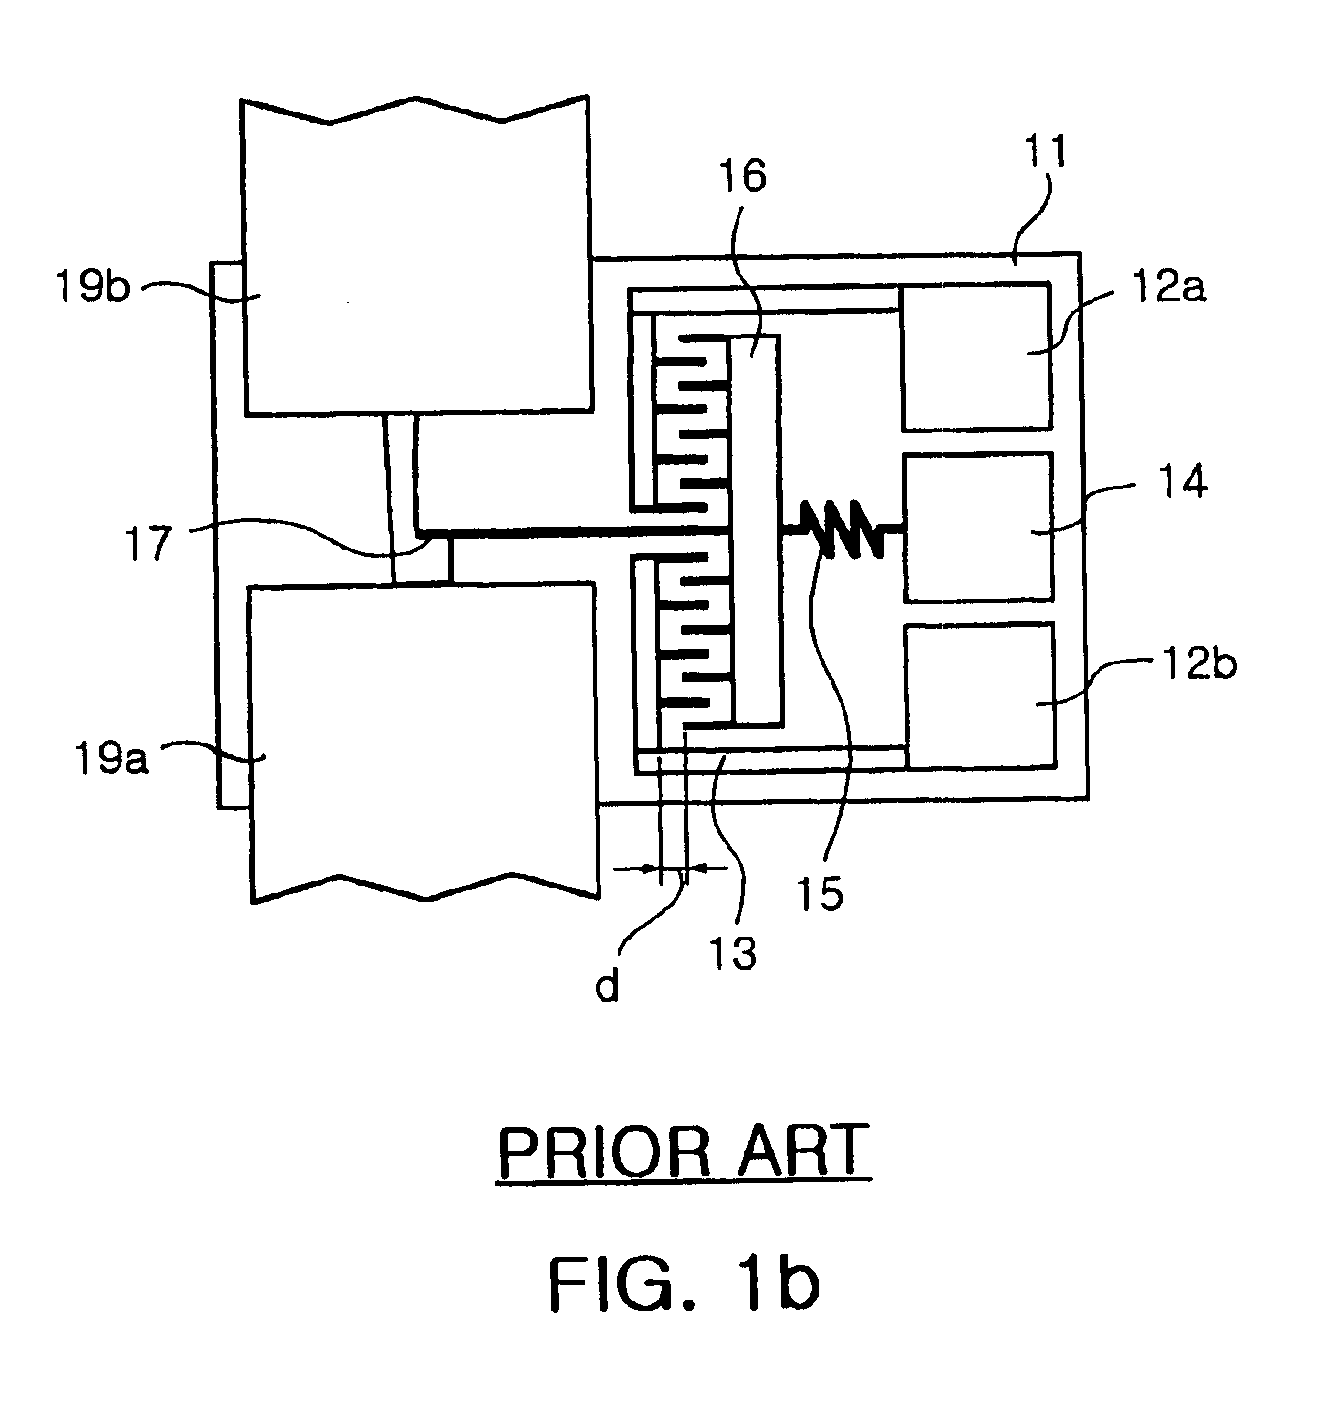 Microelectromechanical system (MEMS) variable optical attenuator